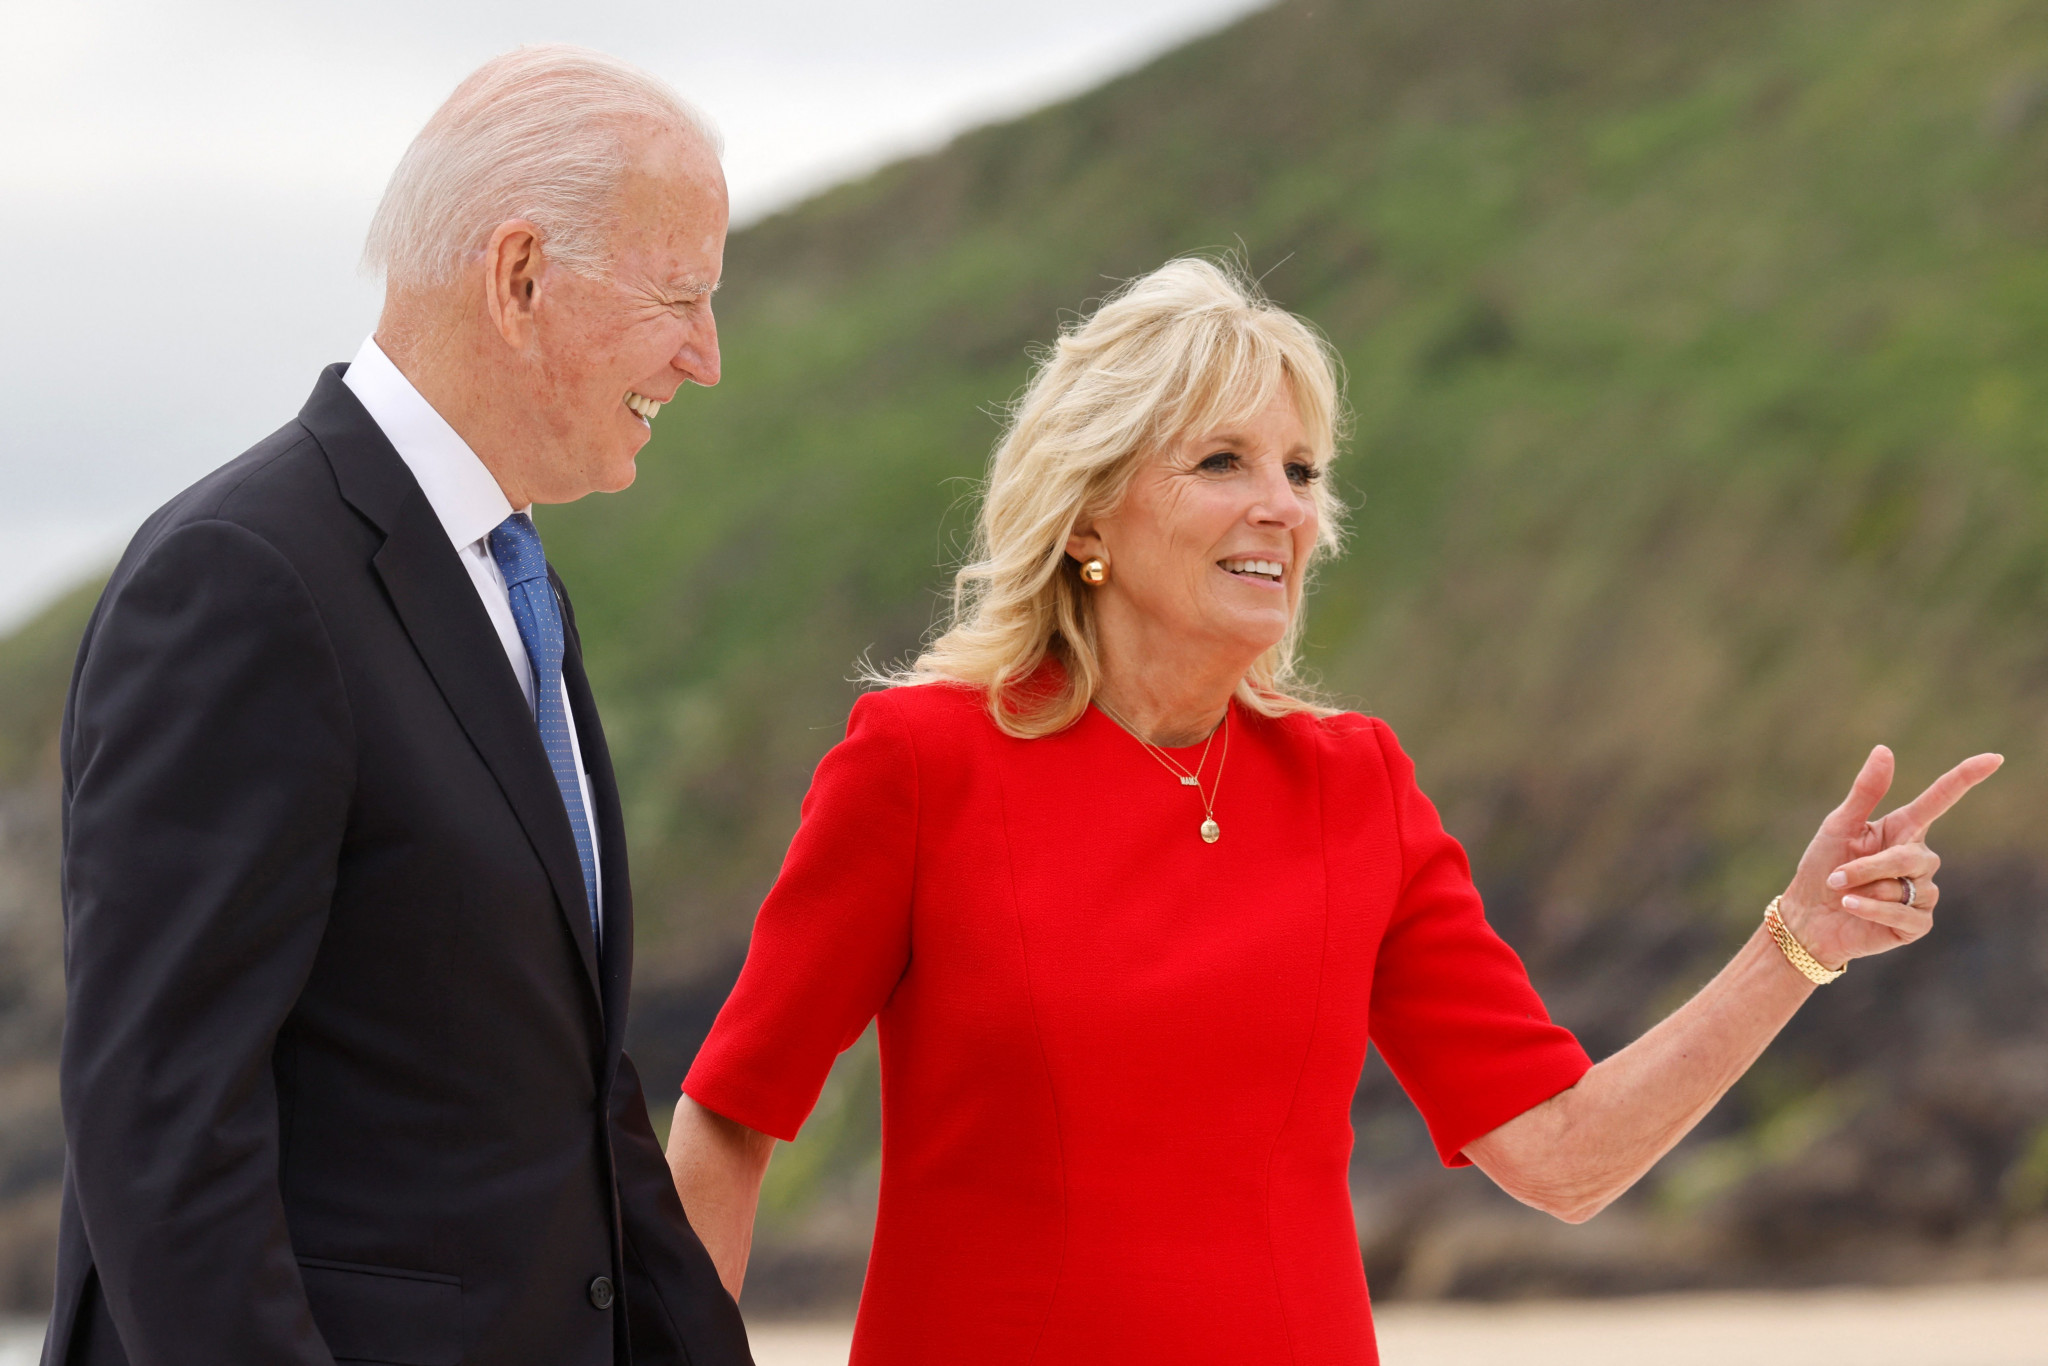 First Lady Jill Biden set to represent United States at Tokyo 2020 Opening Ceremony